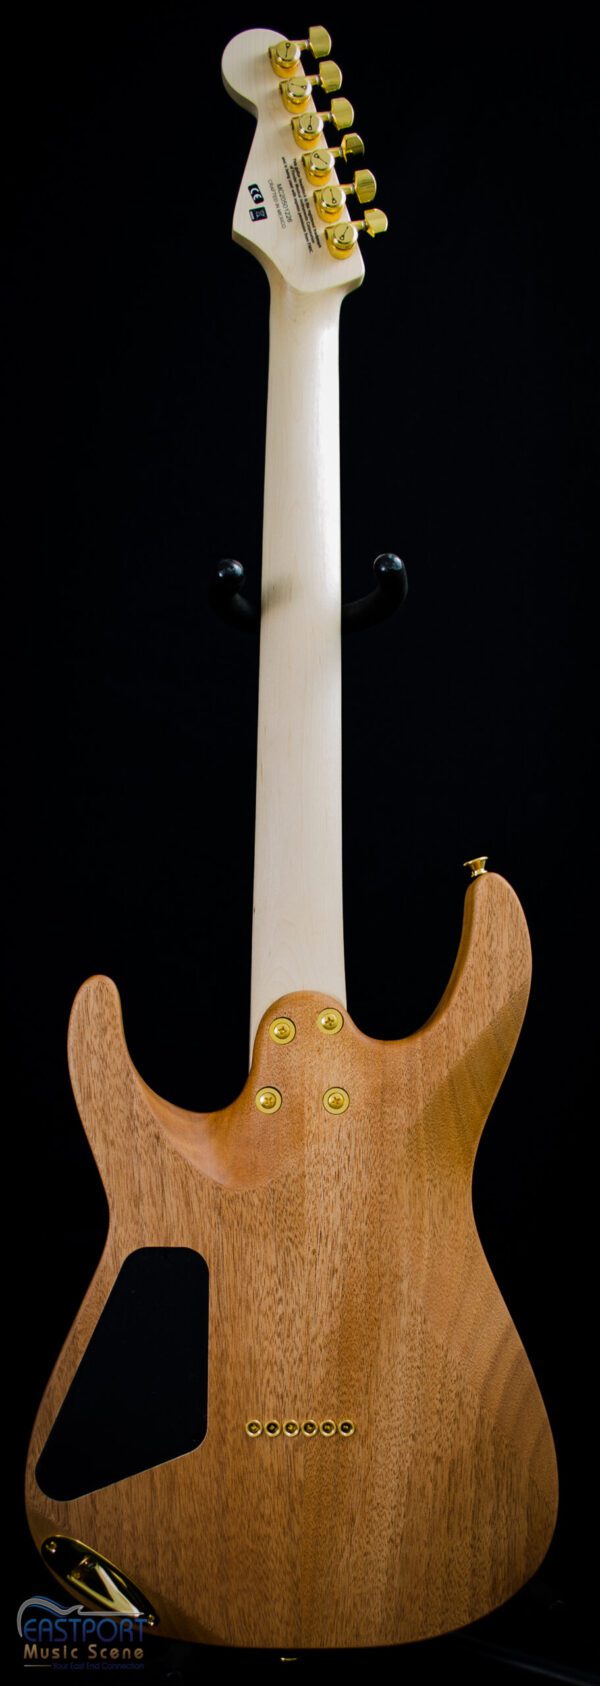 A guitar with the neck and head of it.